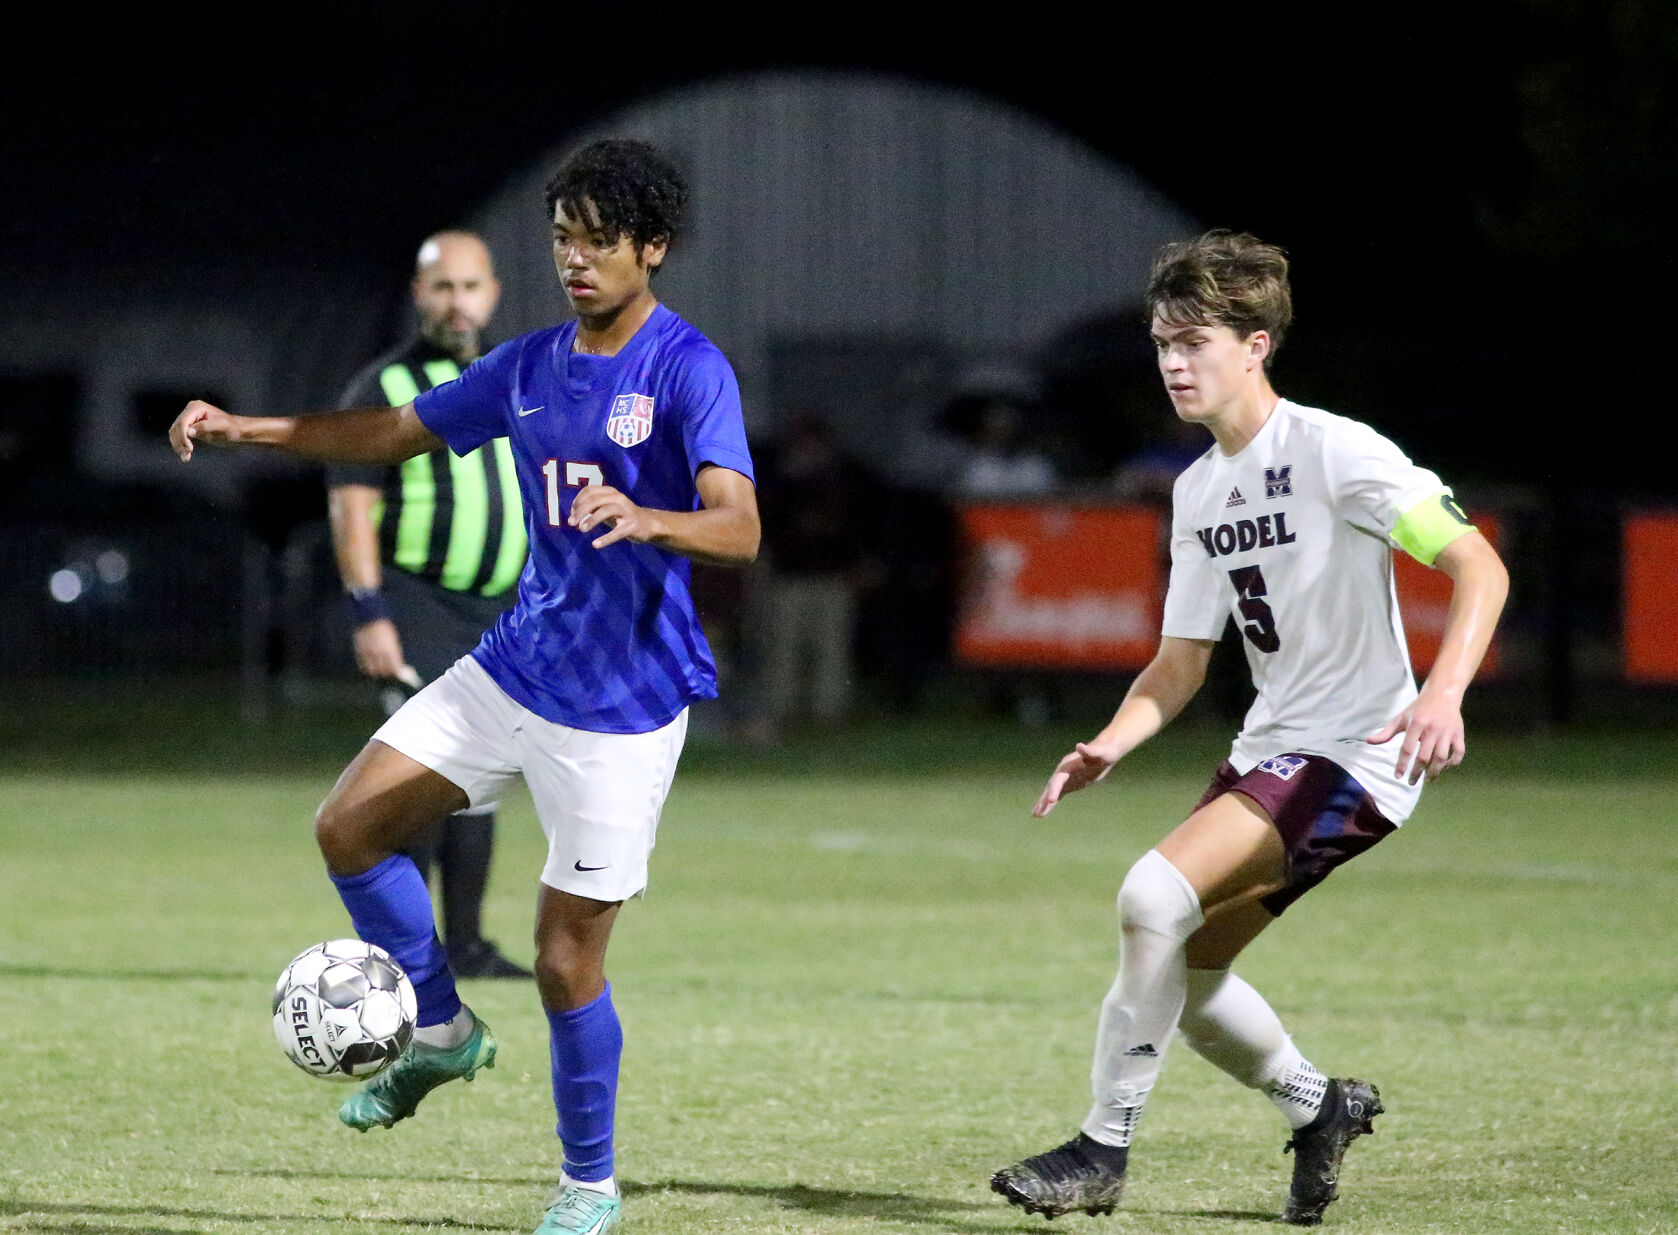 Madison Central Indians and Model Laboratory Patriots Set for Challenging First-Round Matches in 11th Region Boys Soccer Tournament